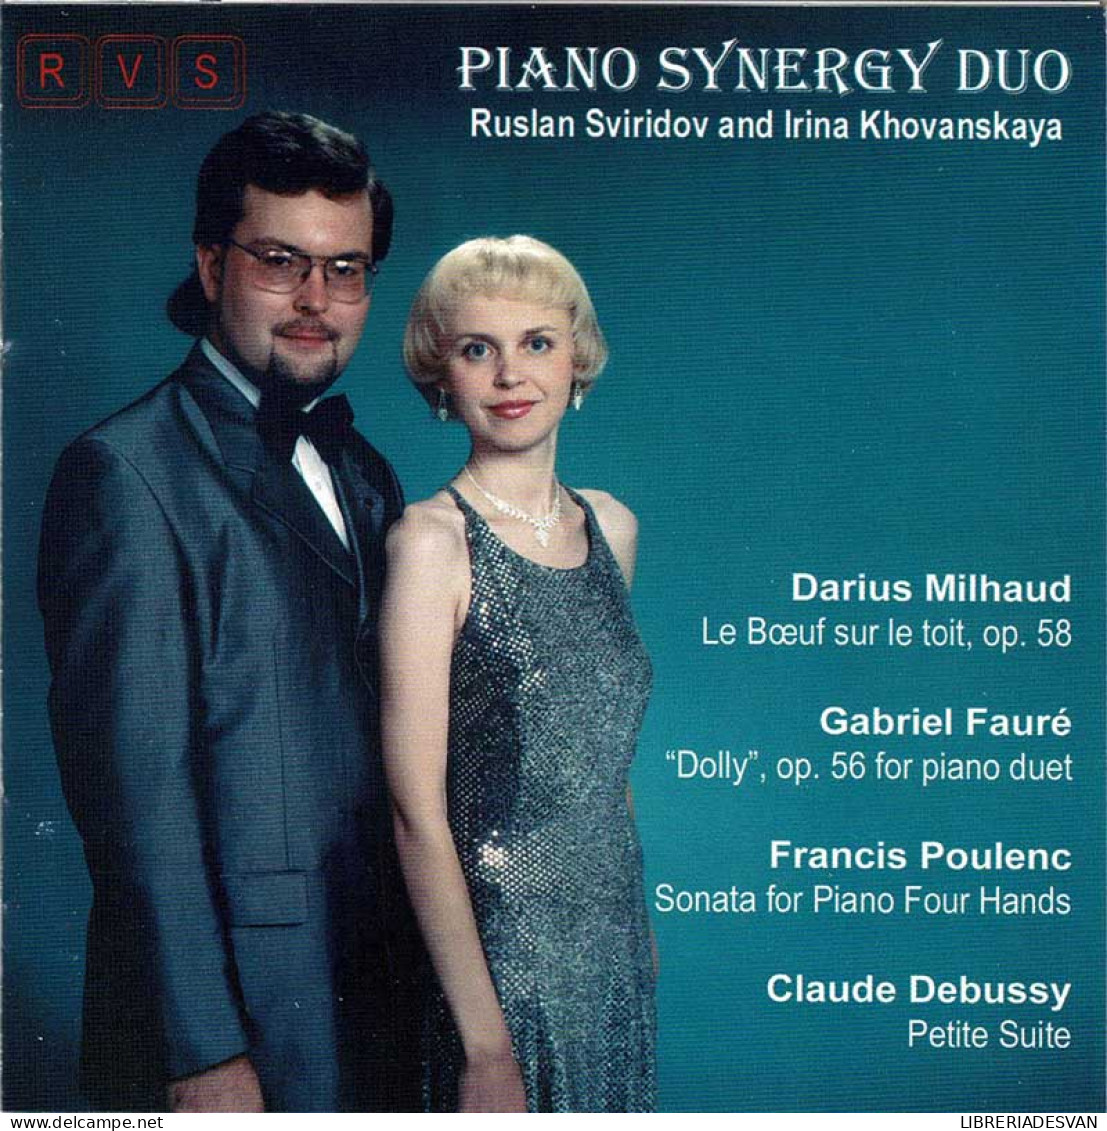 Piano Synergy Duo - Milhaud. Fauré. Poulenc. Debussy. CD - Classical